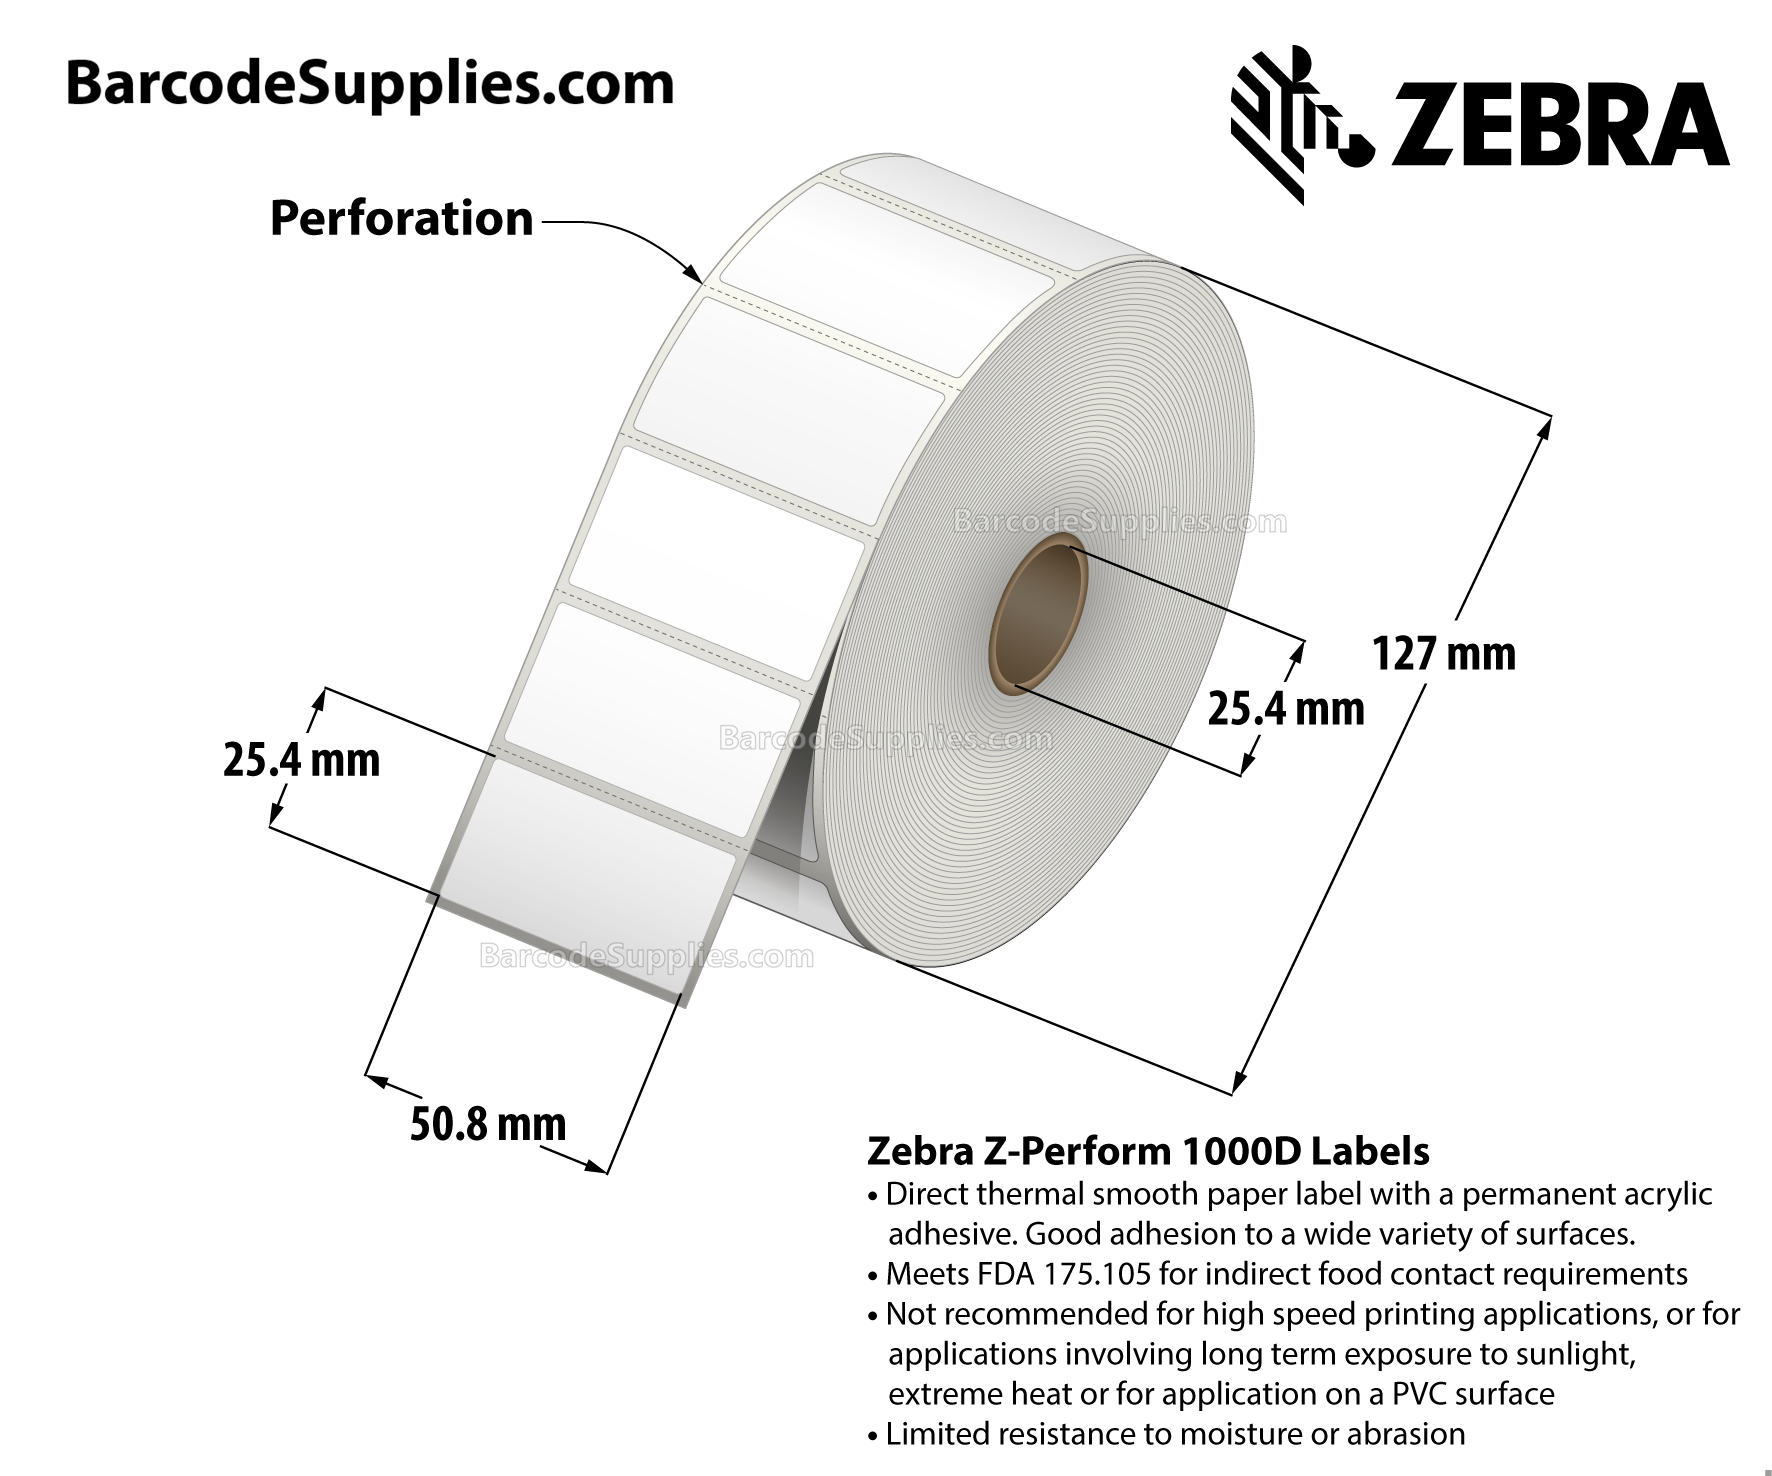 2 x 1 Direct Thermal White Z-Perform 1000D Labels With Permanent Adhesive - Perforated - 2340 Labels Per Roll - Carton Of 6 Rolls - 14040 Labels Total - MPN: 10026381